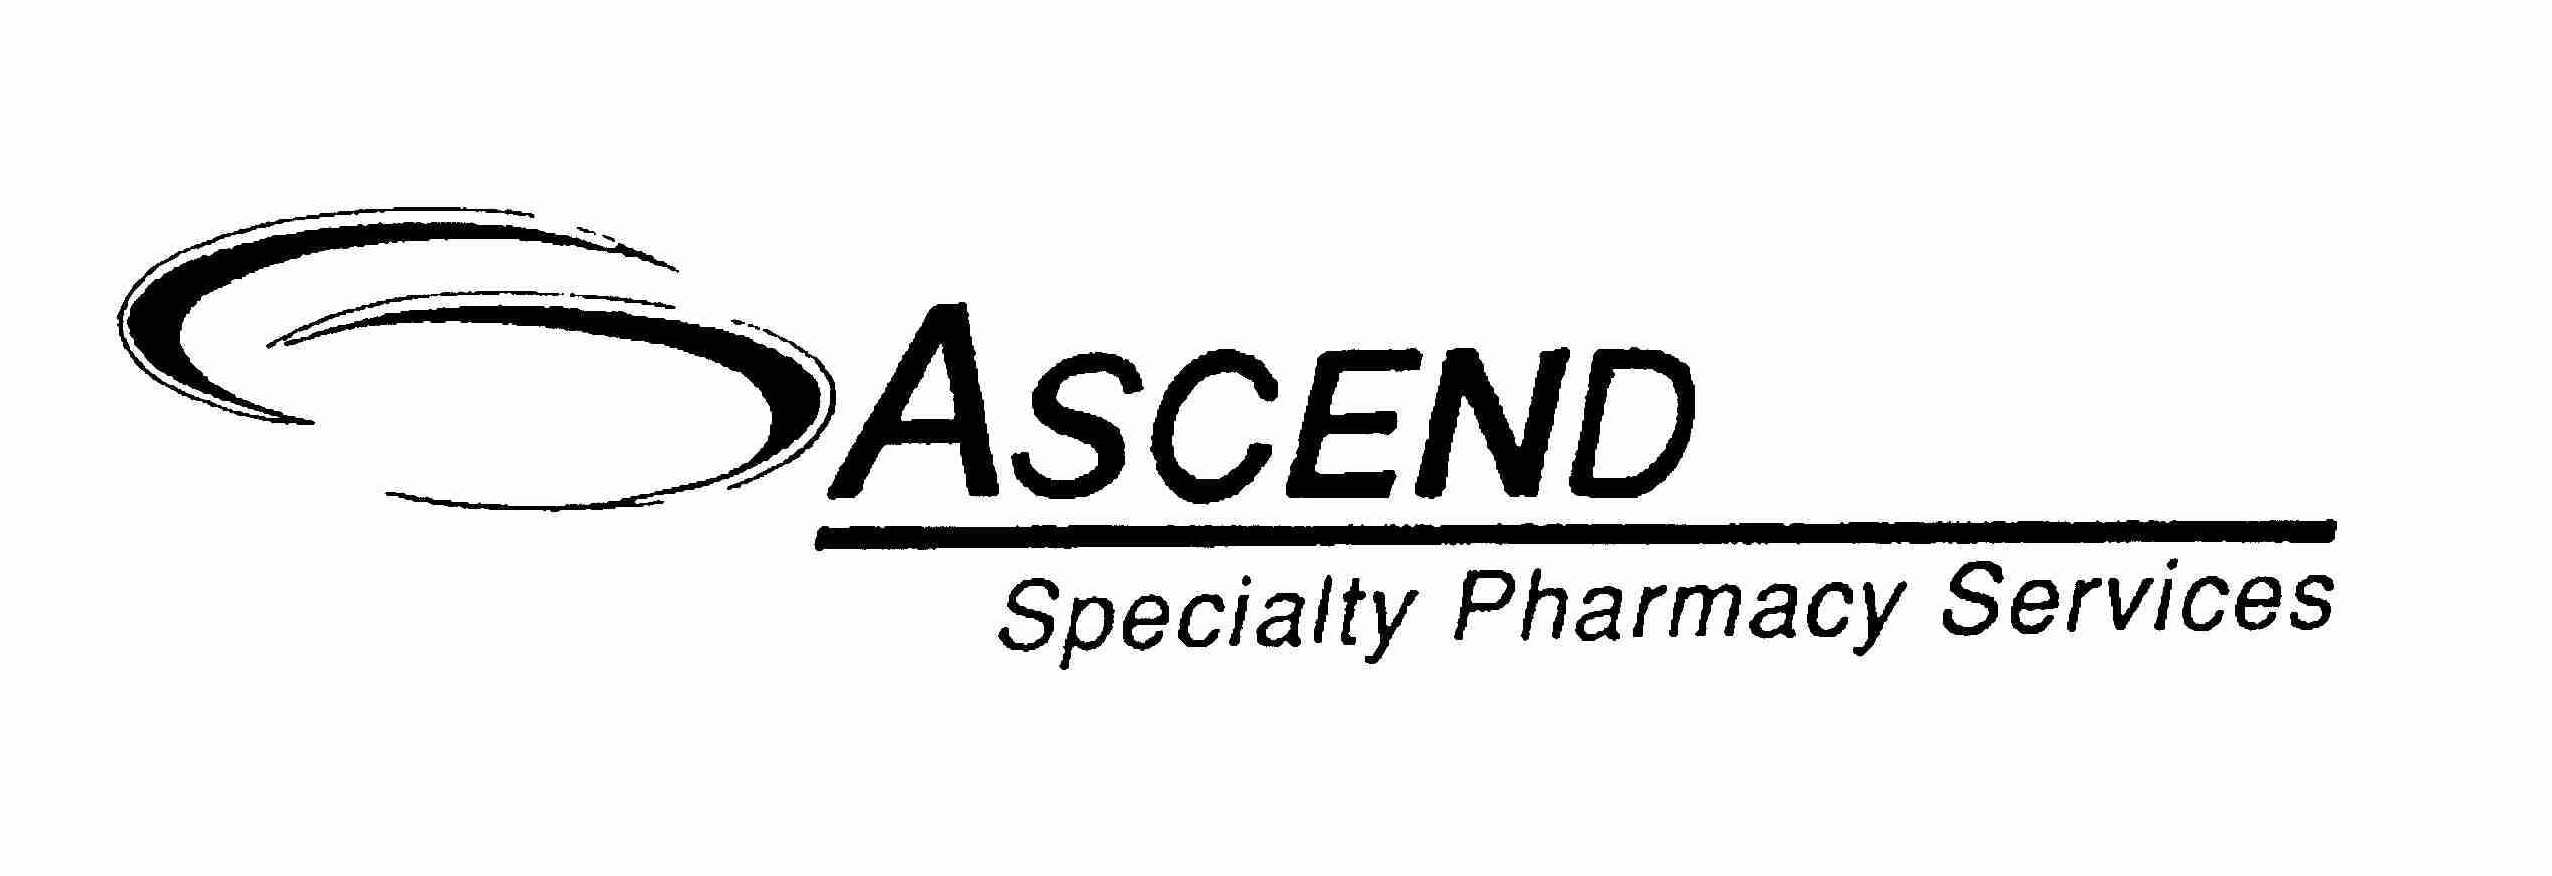 Trademark Logo ASCEND SPECIALTY PHARMACY SERVICES